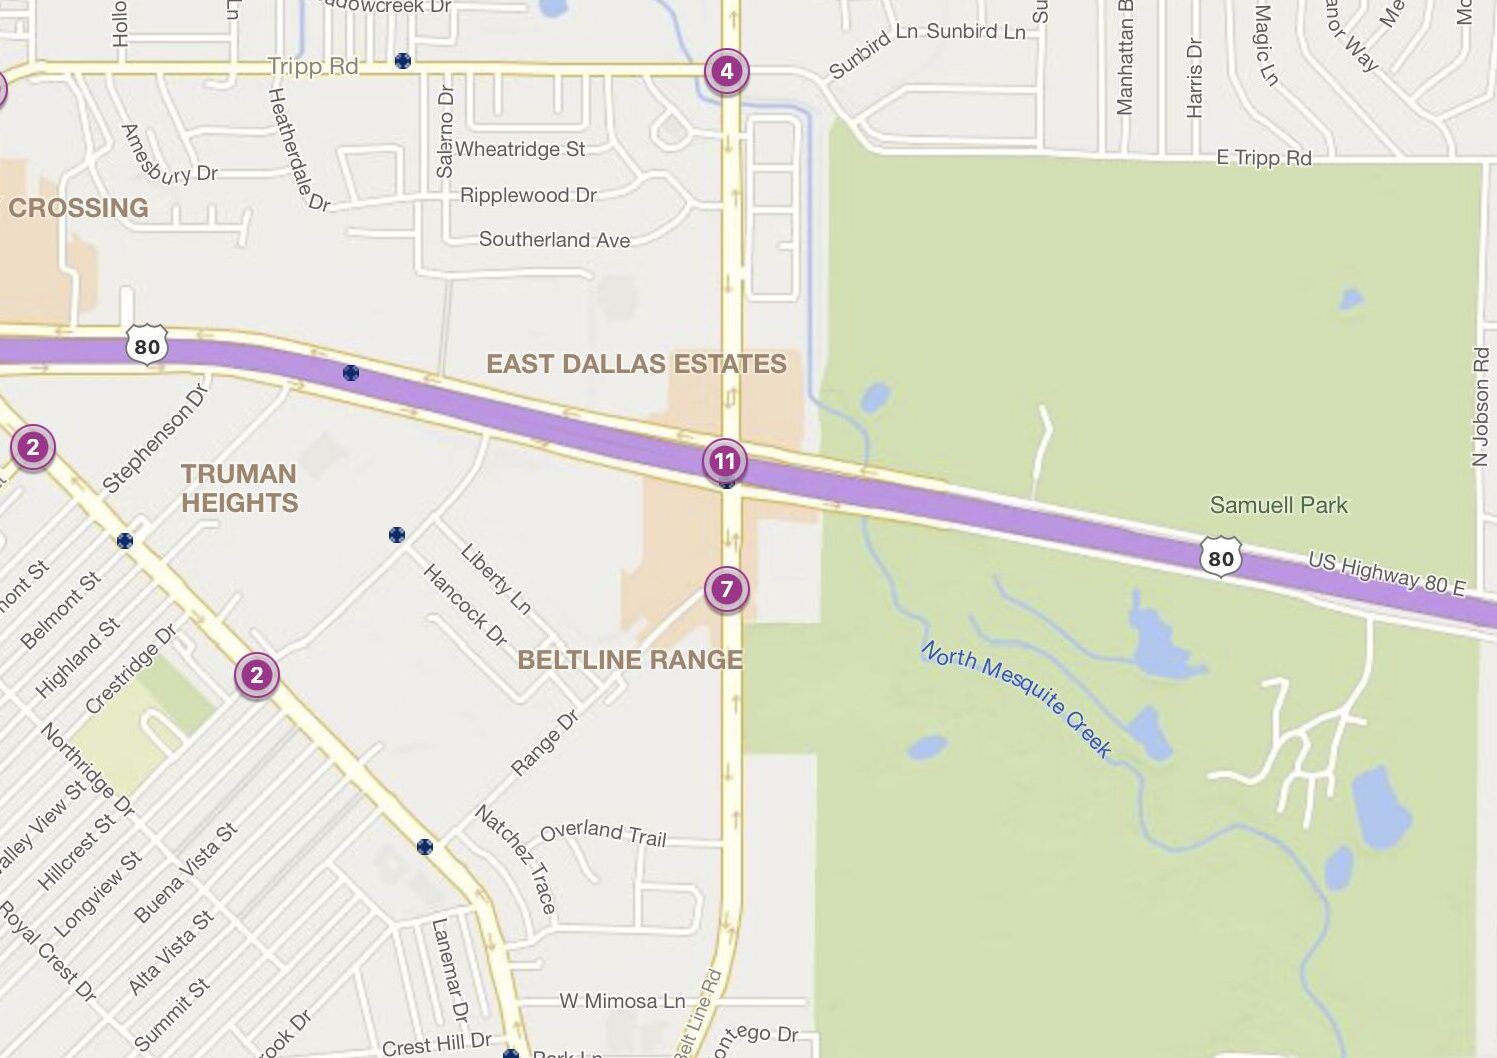 Cluster Map of 2023 Car Accidents at US 80 & N. Belt Line Rd. (TXDOT)